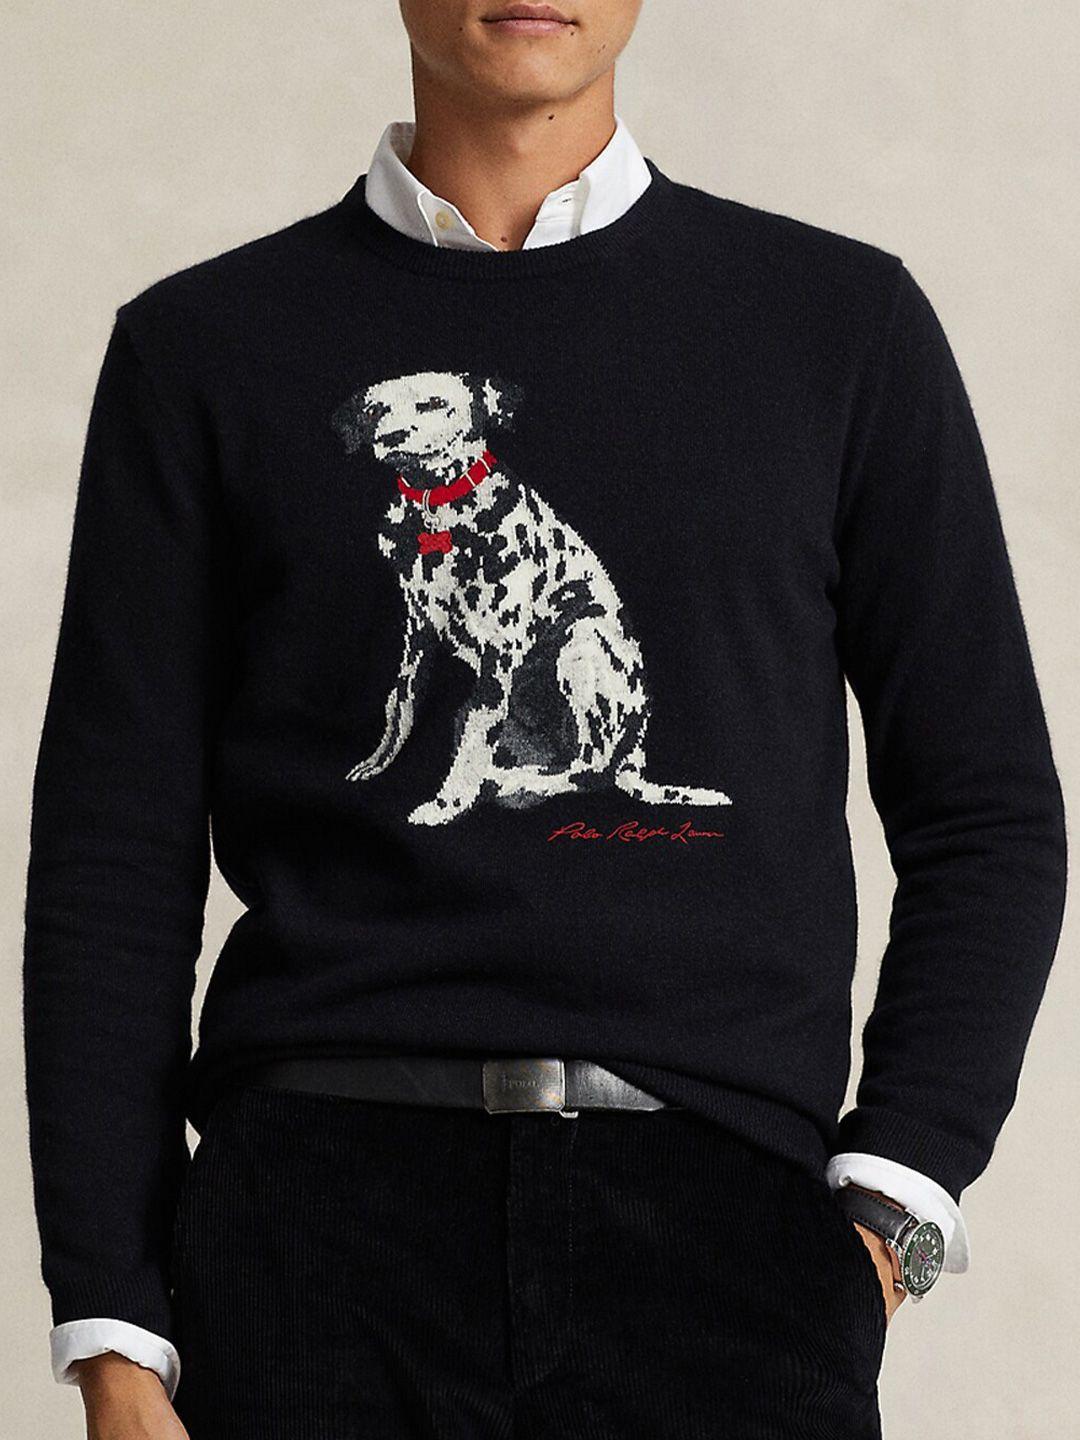 polo ralph lauren graphic printed sweater